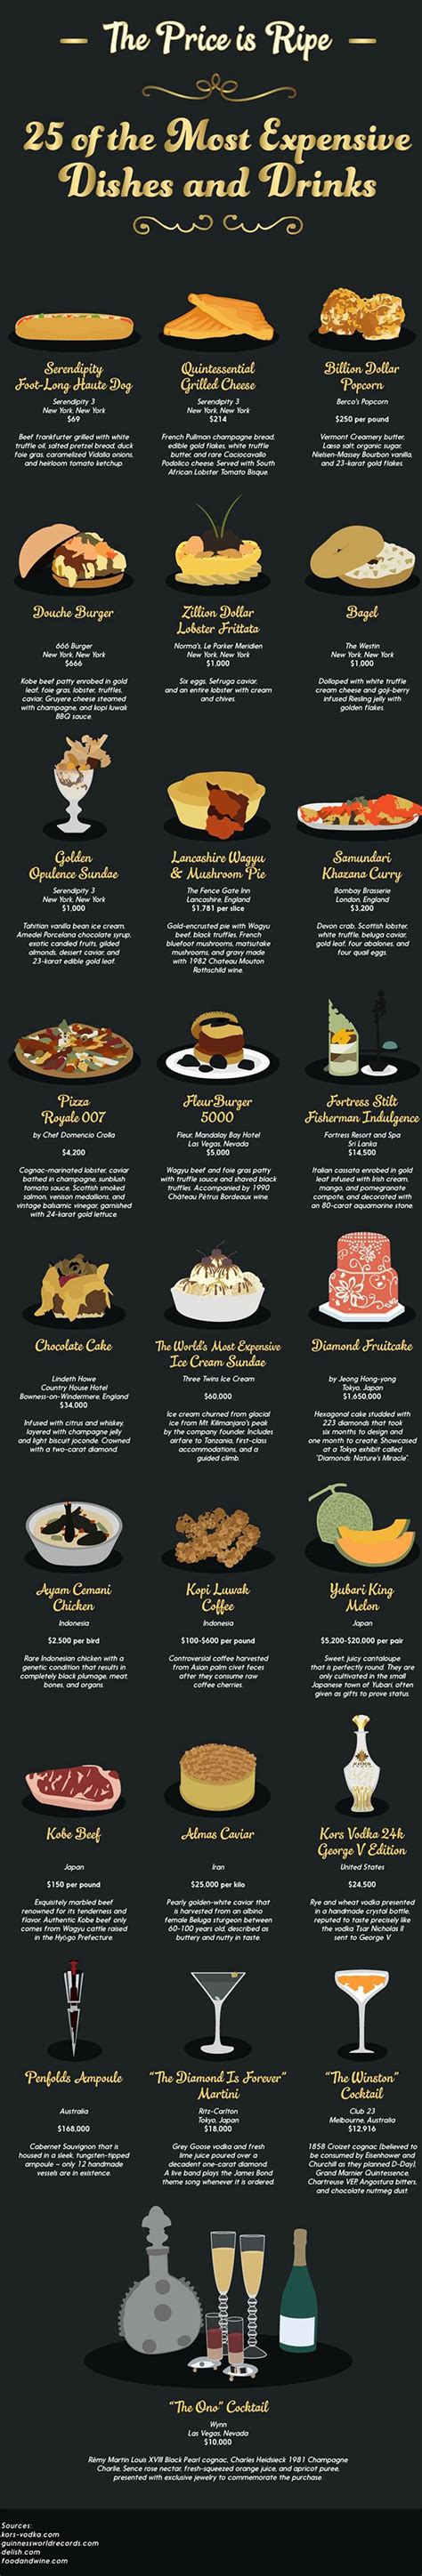 25 Most Expensive Dishes And Drinks Infographic